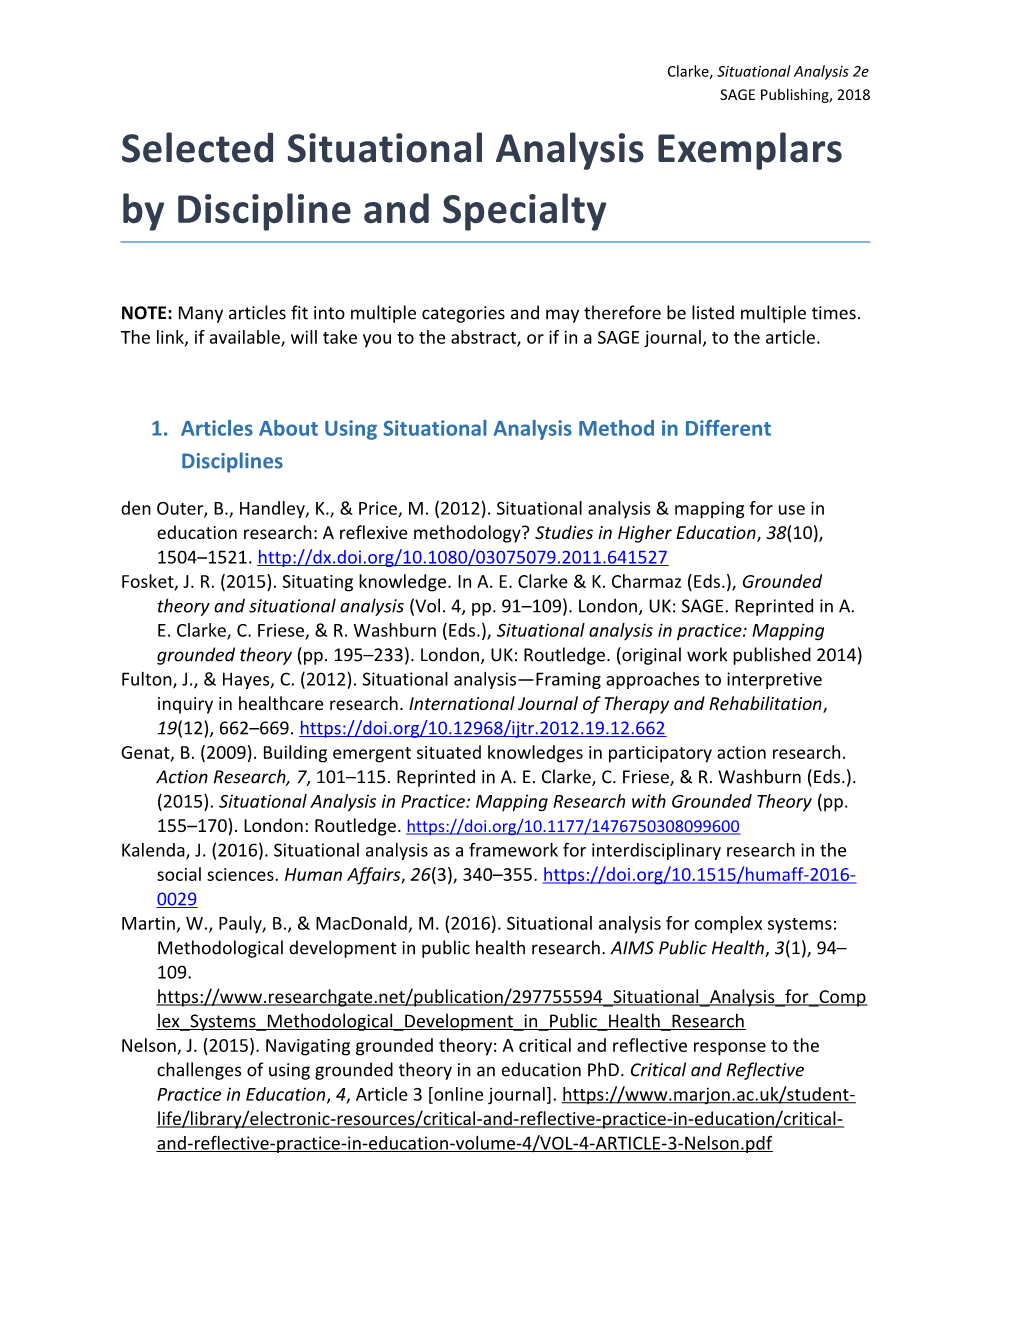 Selected Situational Analysis Exemplars by Discipline and Specialty